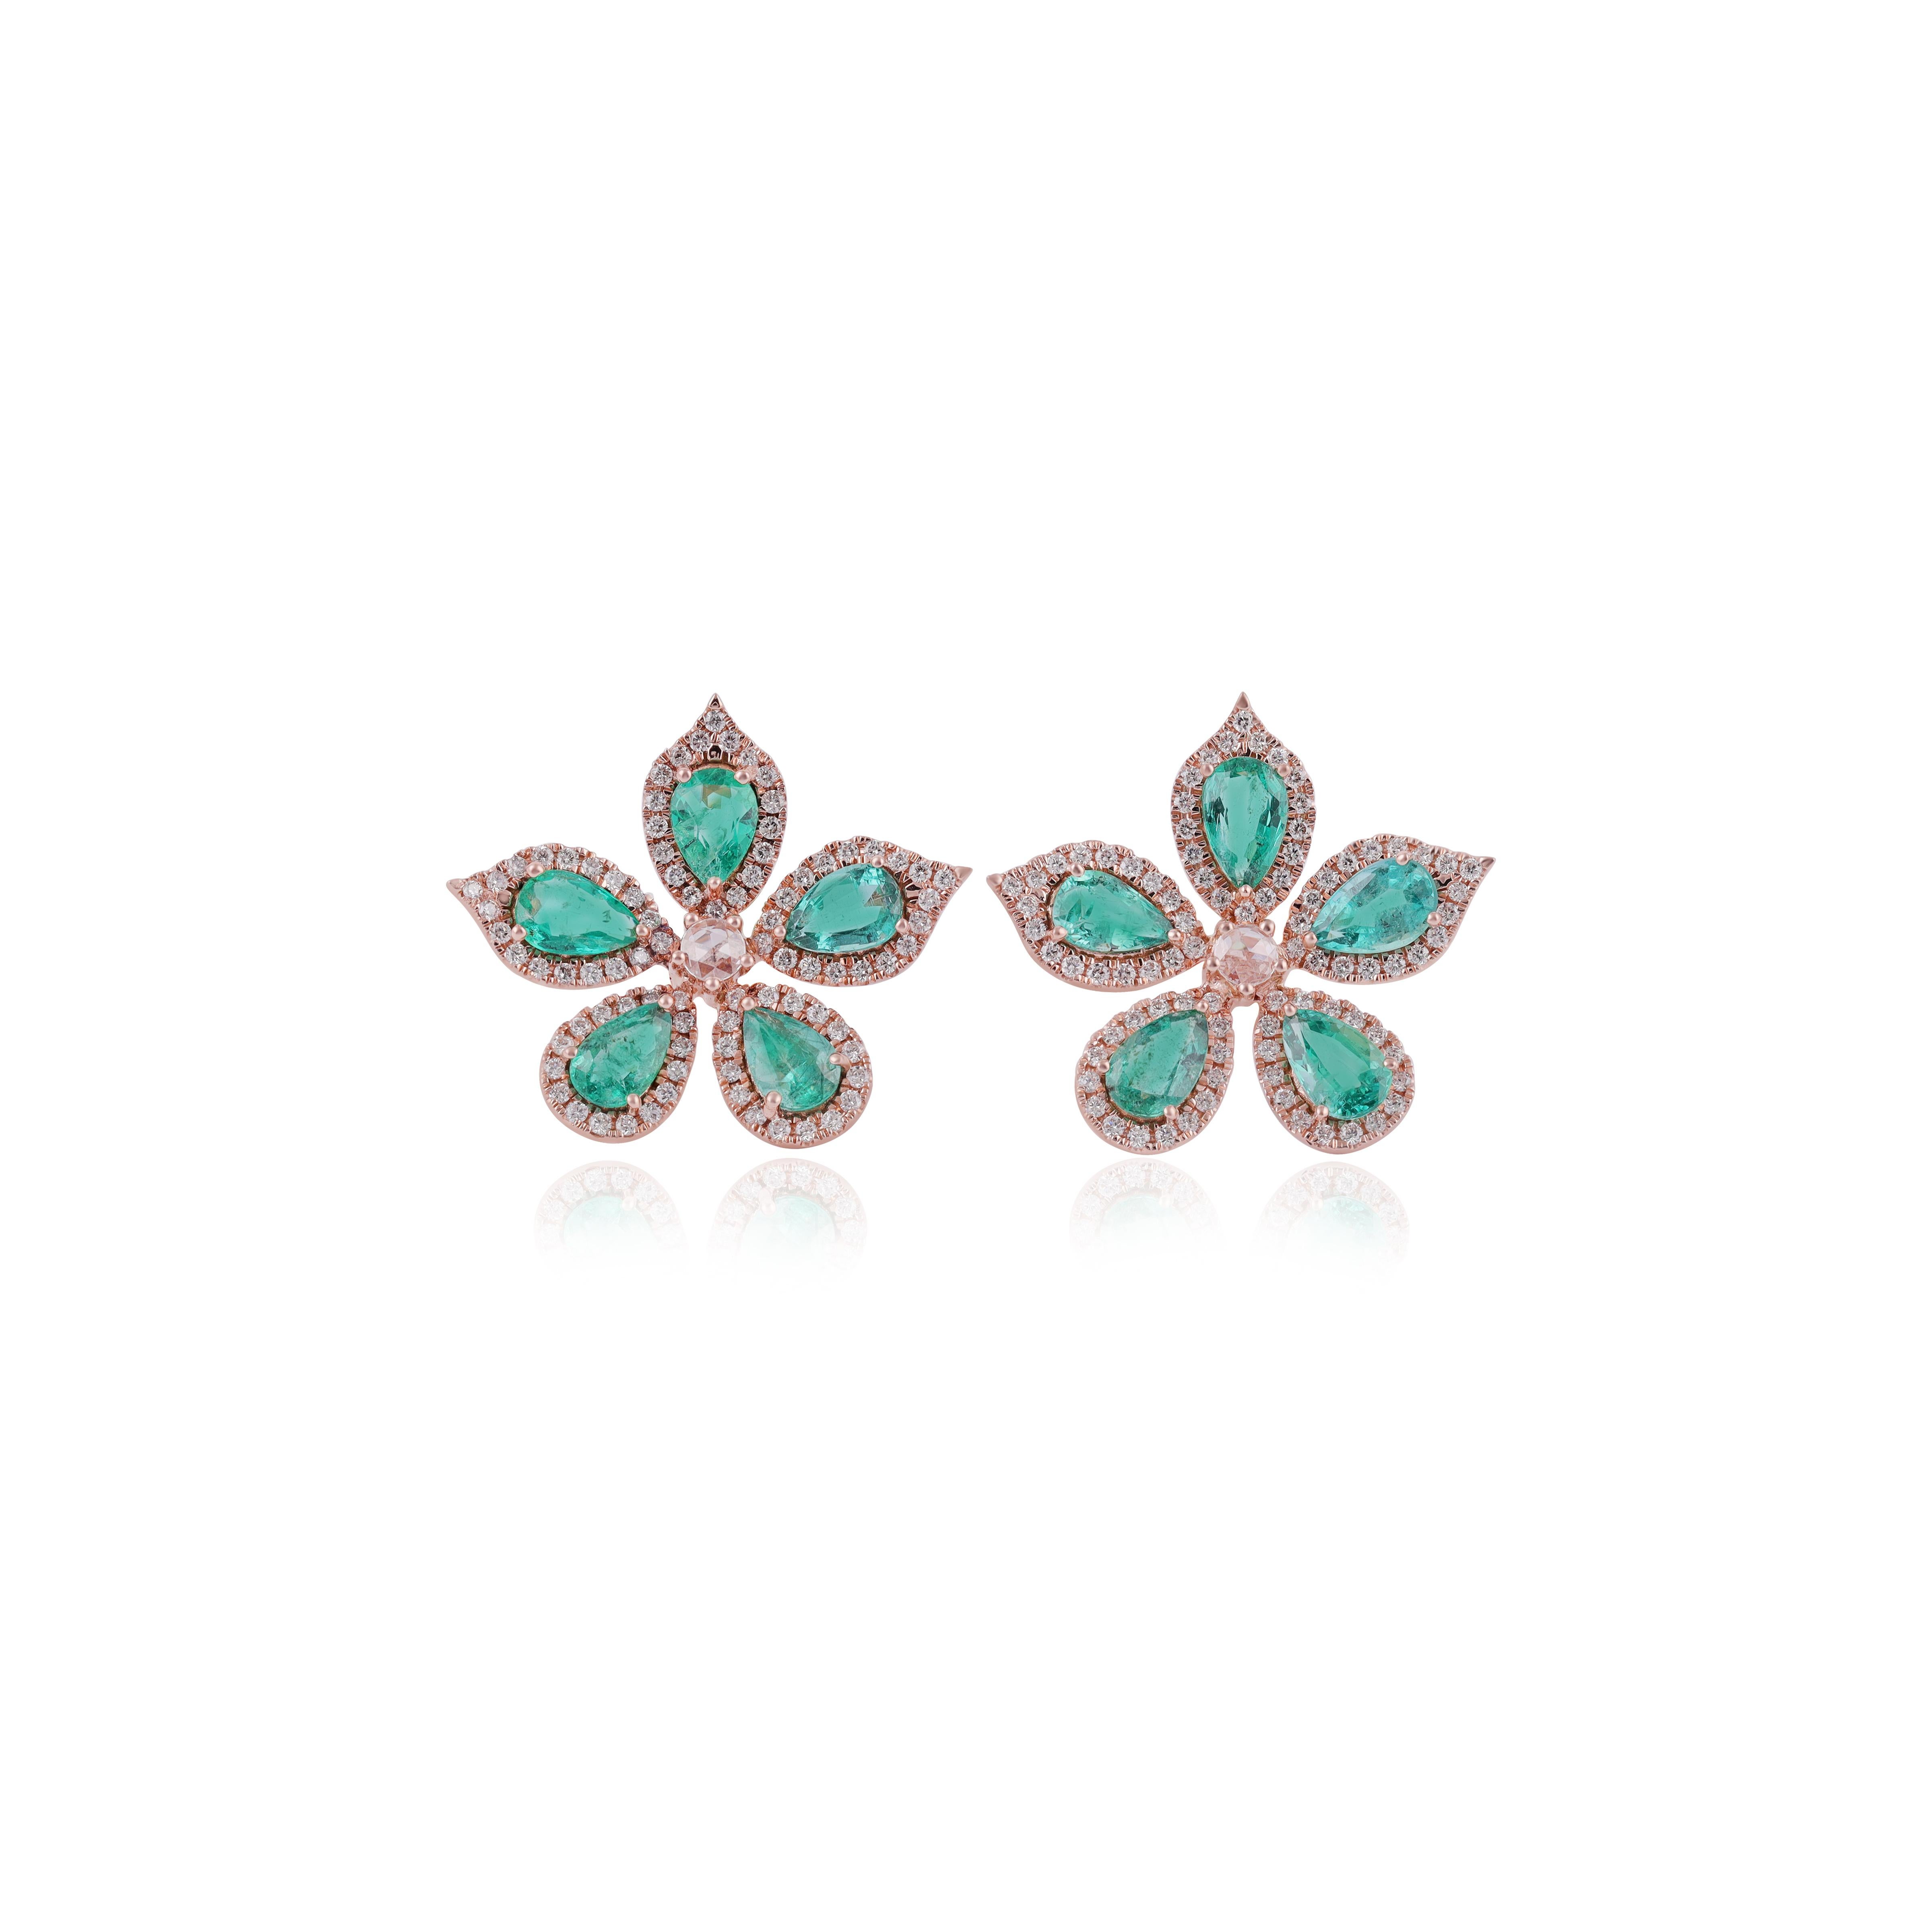 Magnificent Emerald  & Diamond Earrings 
Pear cut Emerald  approx. 3.5 CTS
172 Round brilliant cut diamonds 0.84 CTS
2 rose cut diamond 0.1 CTS
18 k Rose gold mounting 5.80 GMS

Custom Services
Request Customization